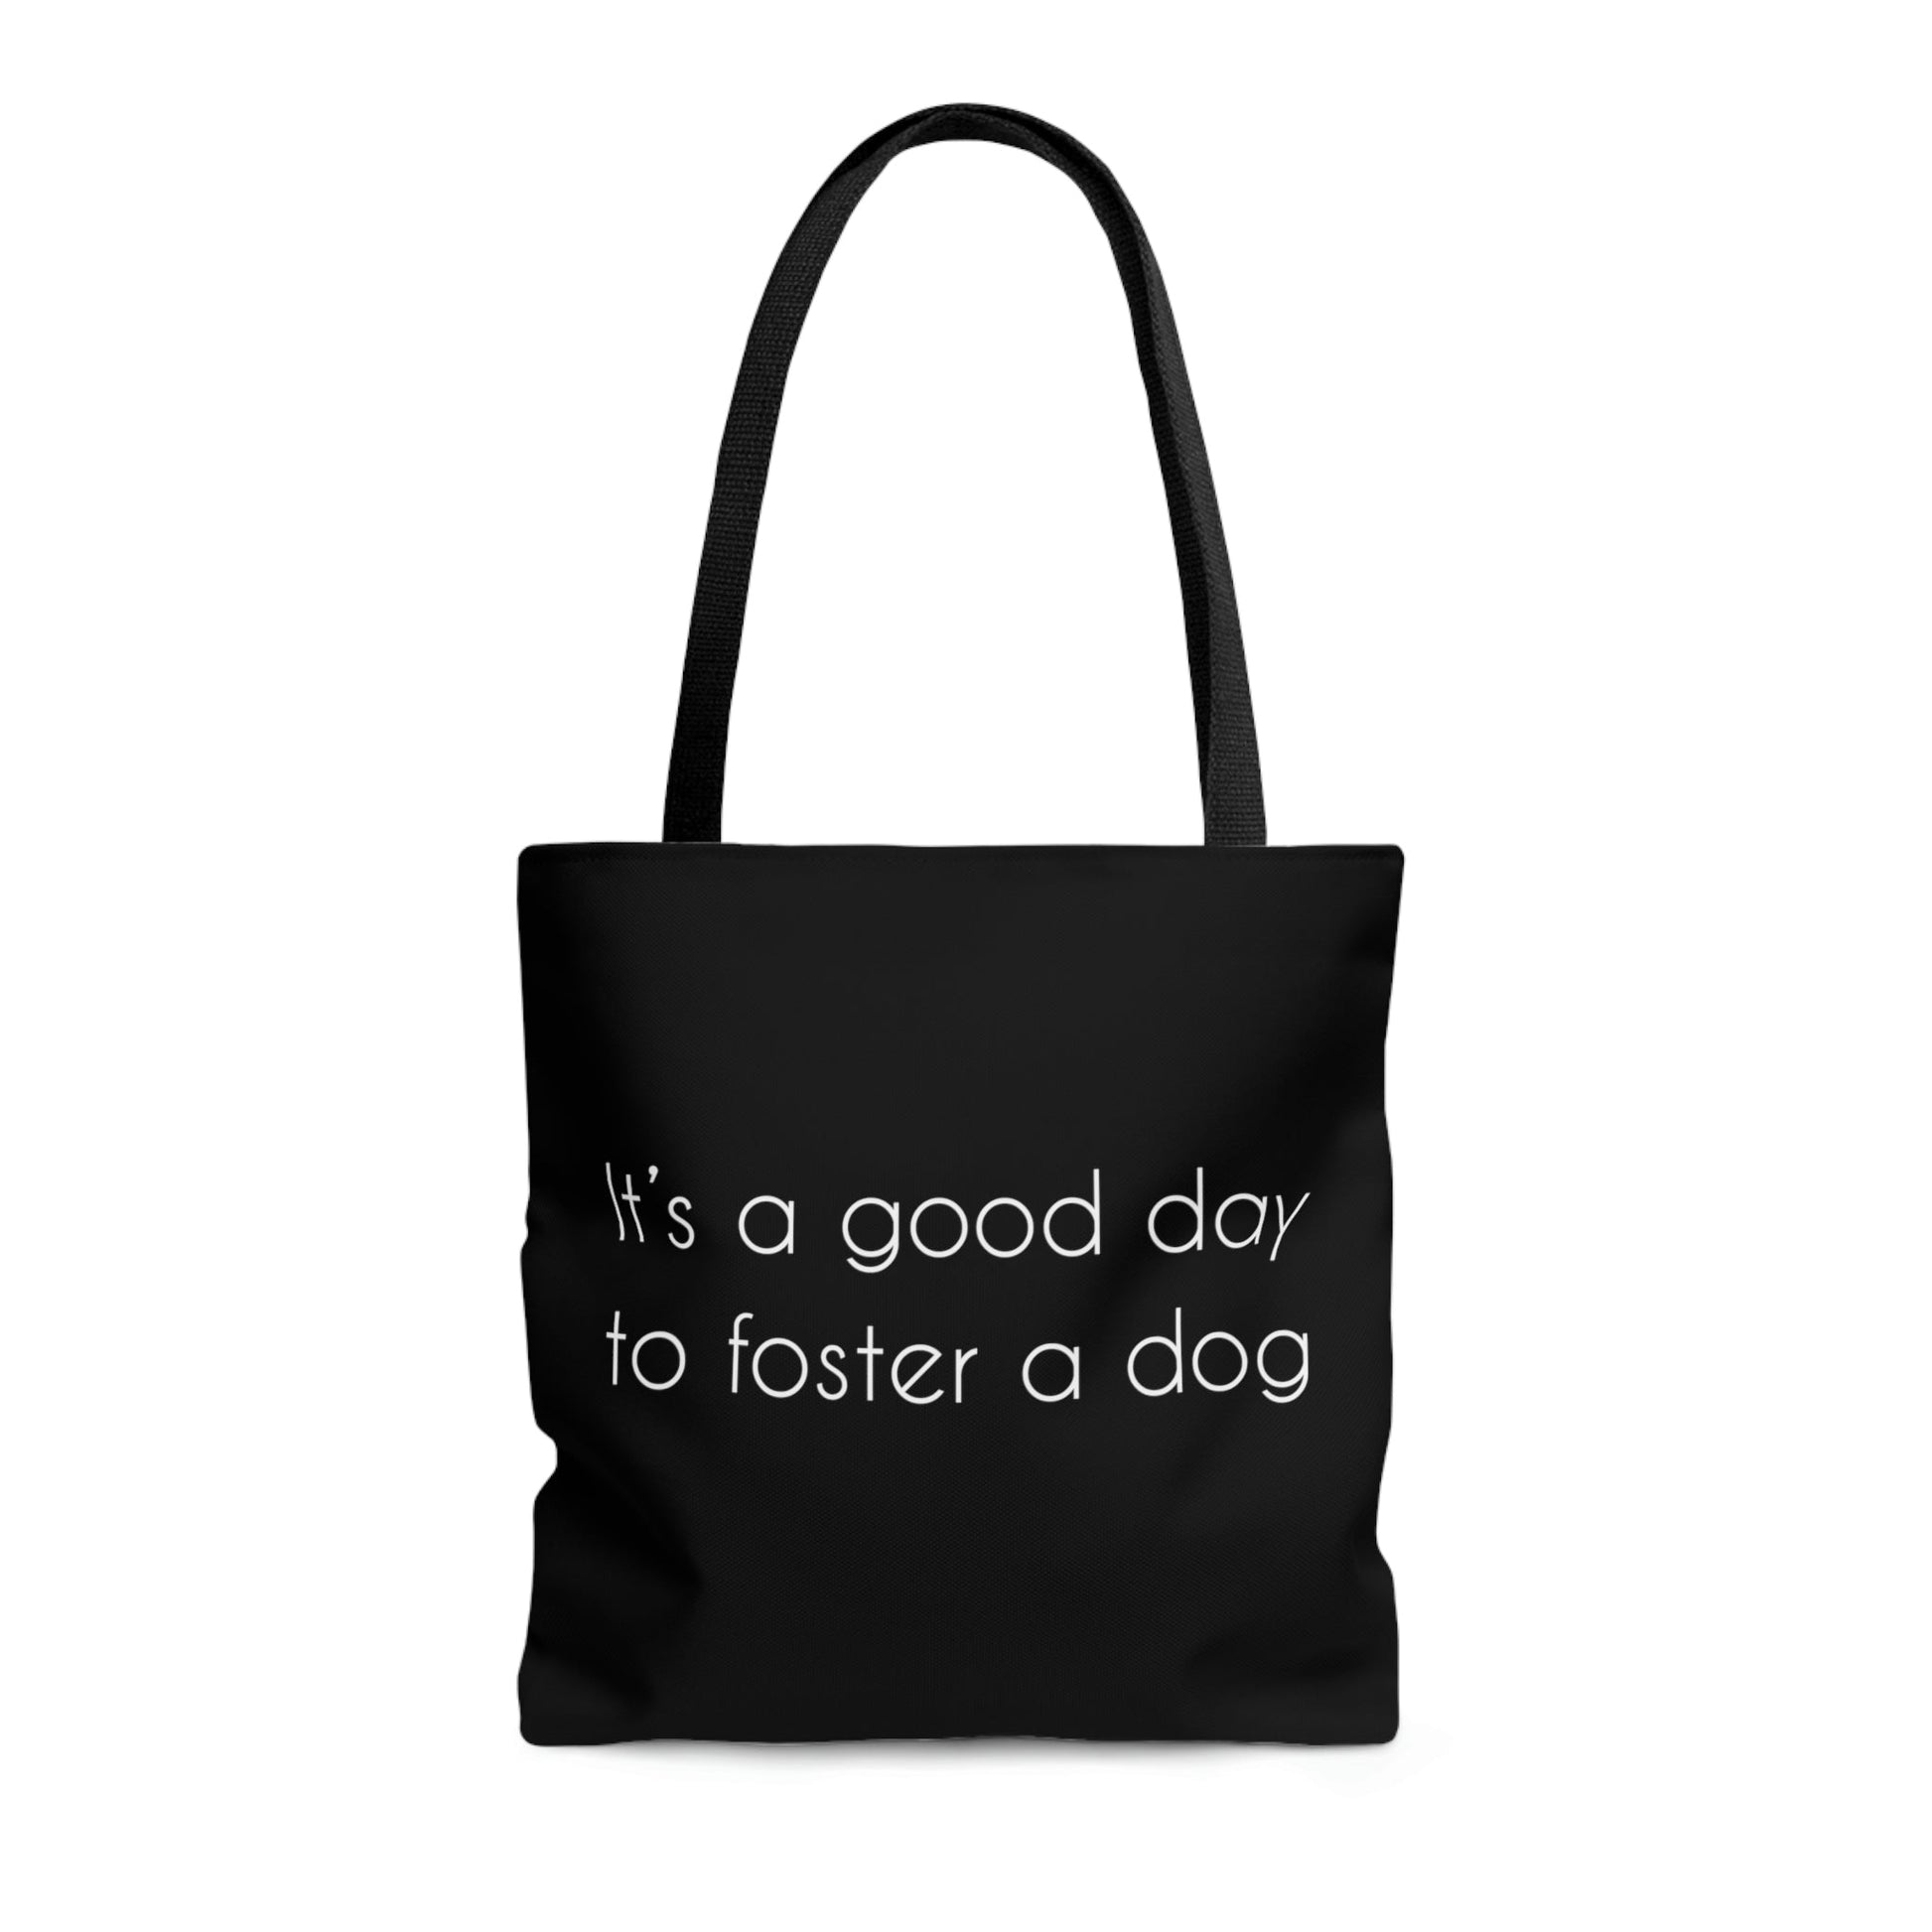 It's A Good Day To Foster A Dog | Tote Bag - Detezi Designs-46169079862779118546